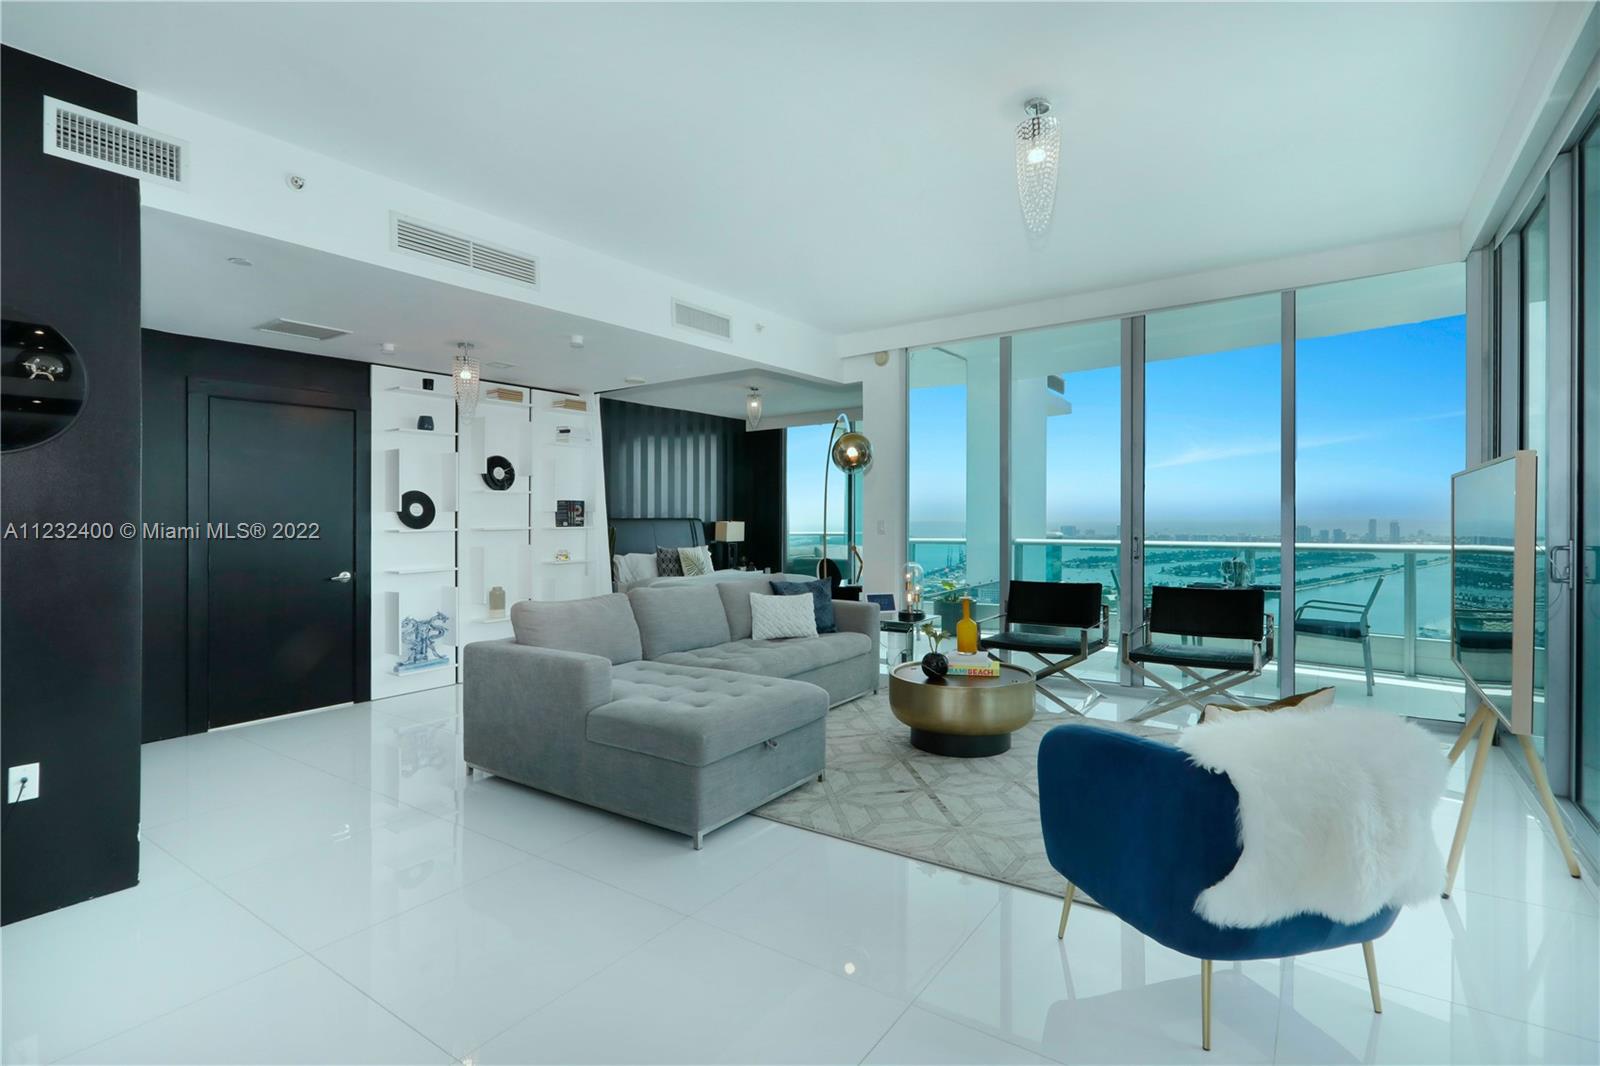 IMPECCABLY DESIGNED HIGH FLOOR FLOW-THRU RESIDENCE WITH STUNNING SUNSETS & PANORAMIC OCEAN, BAY & DOWNTOWN VIEWS! Fully Furnished & Available for Immediate Short Term Rental for 1-6 Months. Private Elevator Entry into Open Floorplan w/ 1,796 SF Living Space + 802 SF of Three Wraparound Terraces w/ 2 Beds + Den + 3.5 Baths. Breathtaking Views from Living Area w/ Custom Built-in White Bookcases. Italian Chef’s Eat-in Kitchen by Aran Cucina w/ SS SubZero & Miele Apps w/ Mirrored Cabinetry, Huge Island & Mirrored Bar + Dining Area. Master Suite w/ Direct Bay Views & Terrace. Master Bath w/ Mirrored Wall & Double Vanity. Custom Lighting & Automatic Shades. Architecture by Luis Revuelta & Common Areas by Sam Robin w/ 2 Pools, Spa, Gym, Lounge, Kid's Room, Theater, Concierge, Valet & Security.